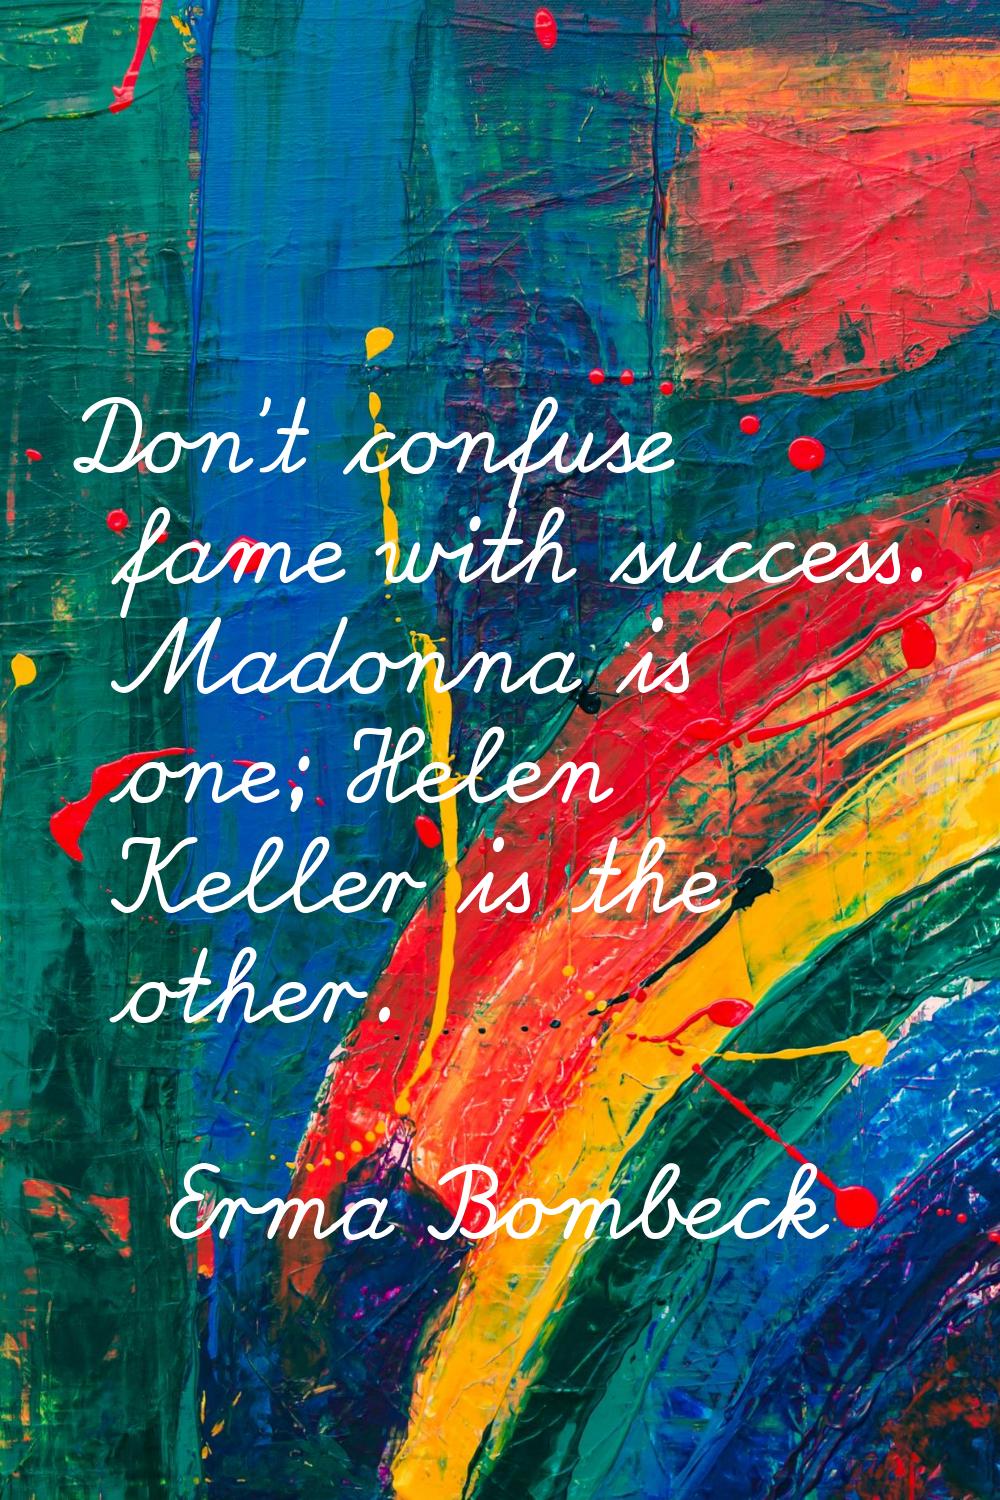 Don't confuse fame with success. Madonna is one; Helen Keller is the other.